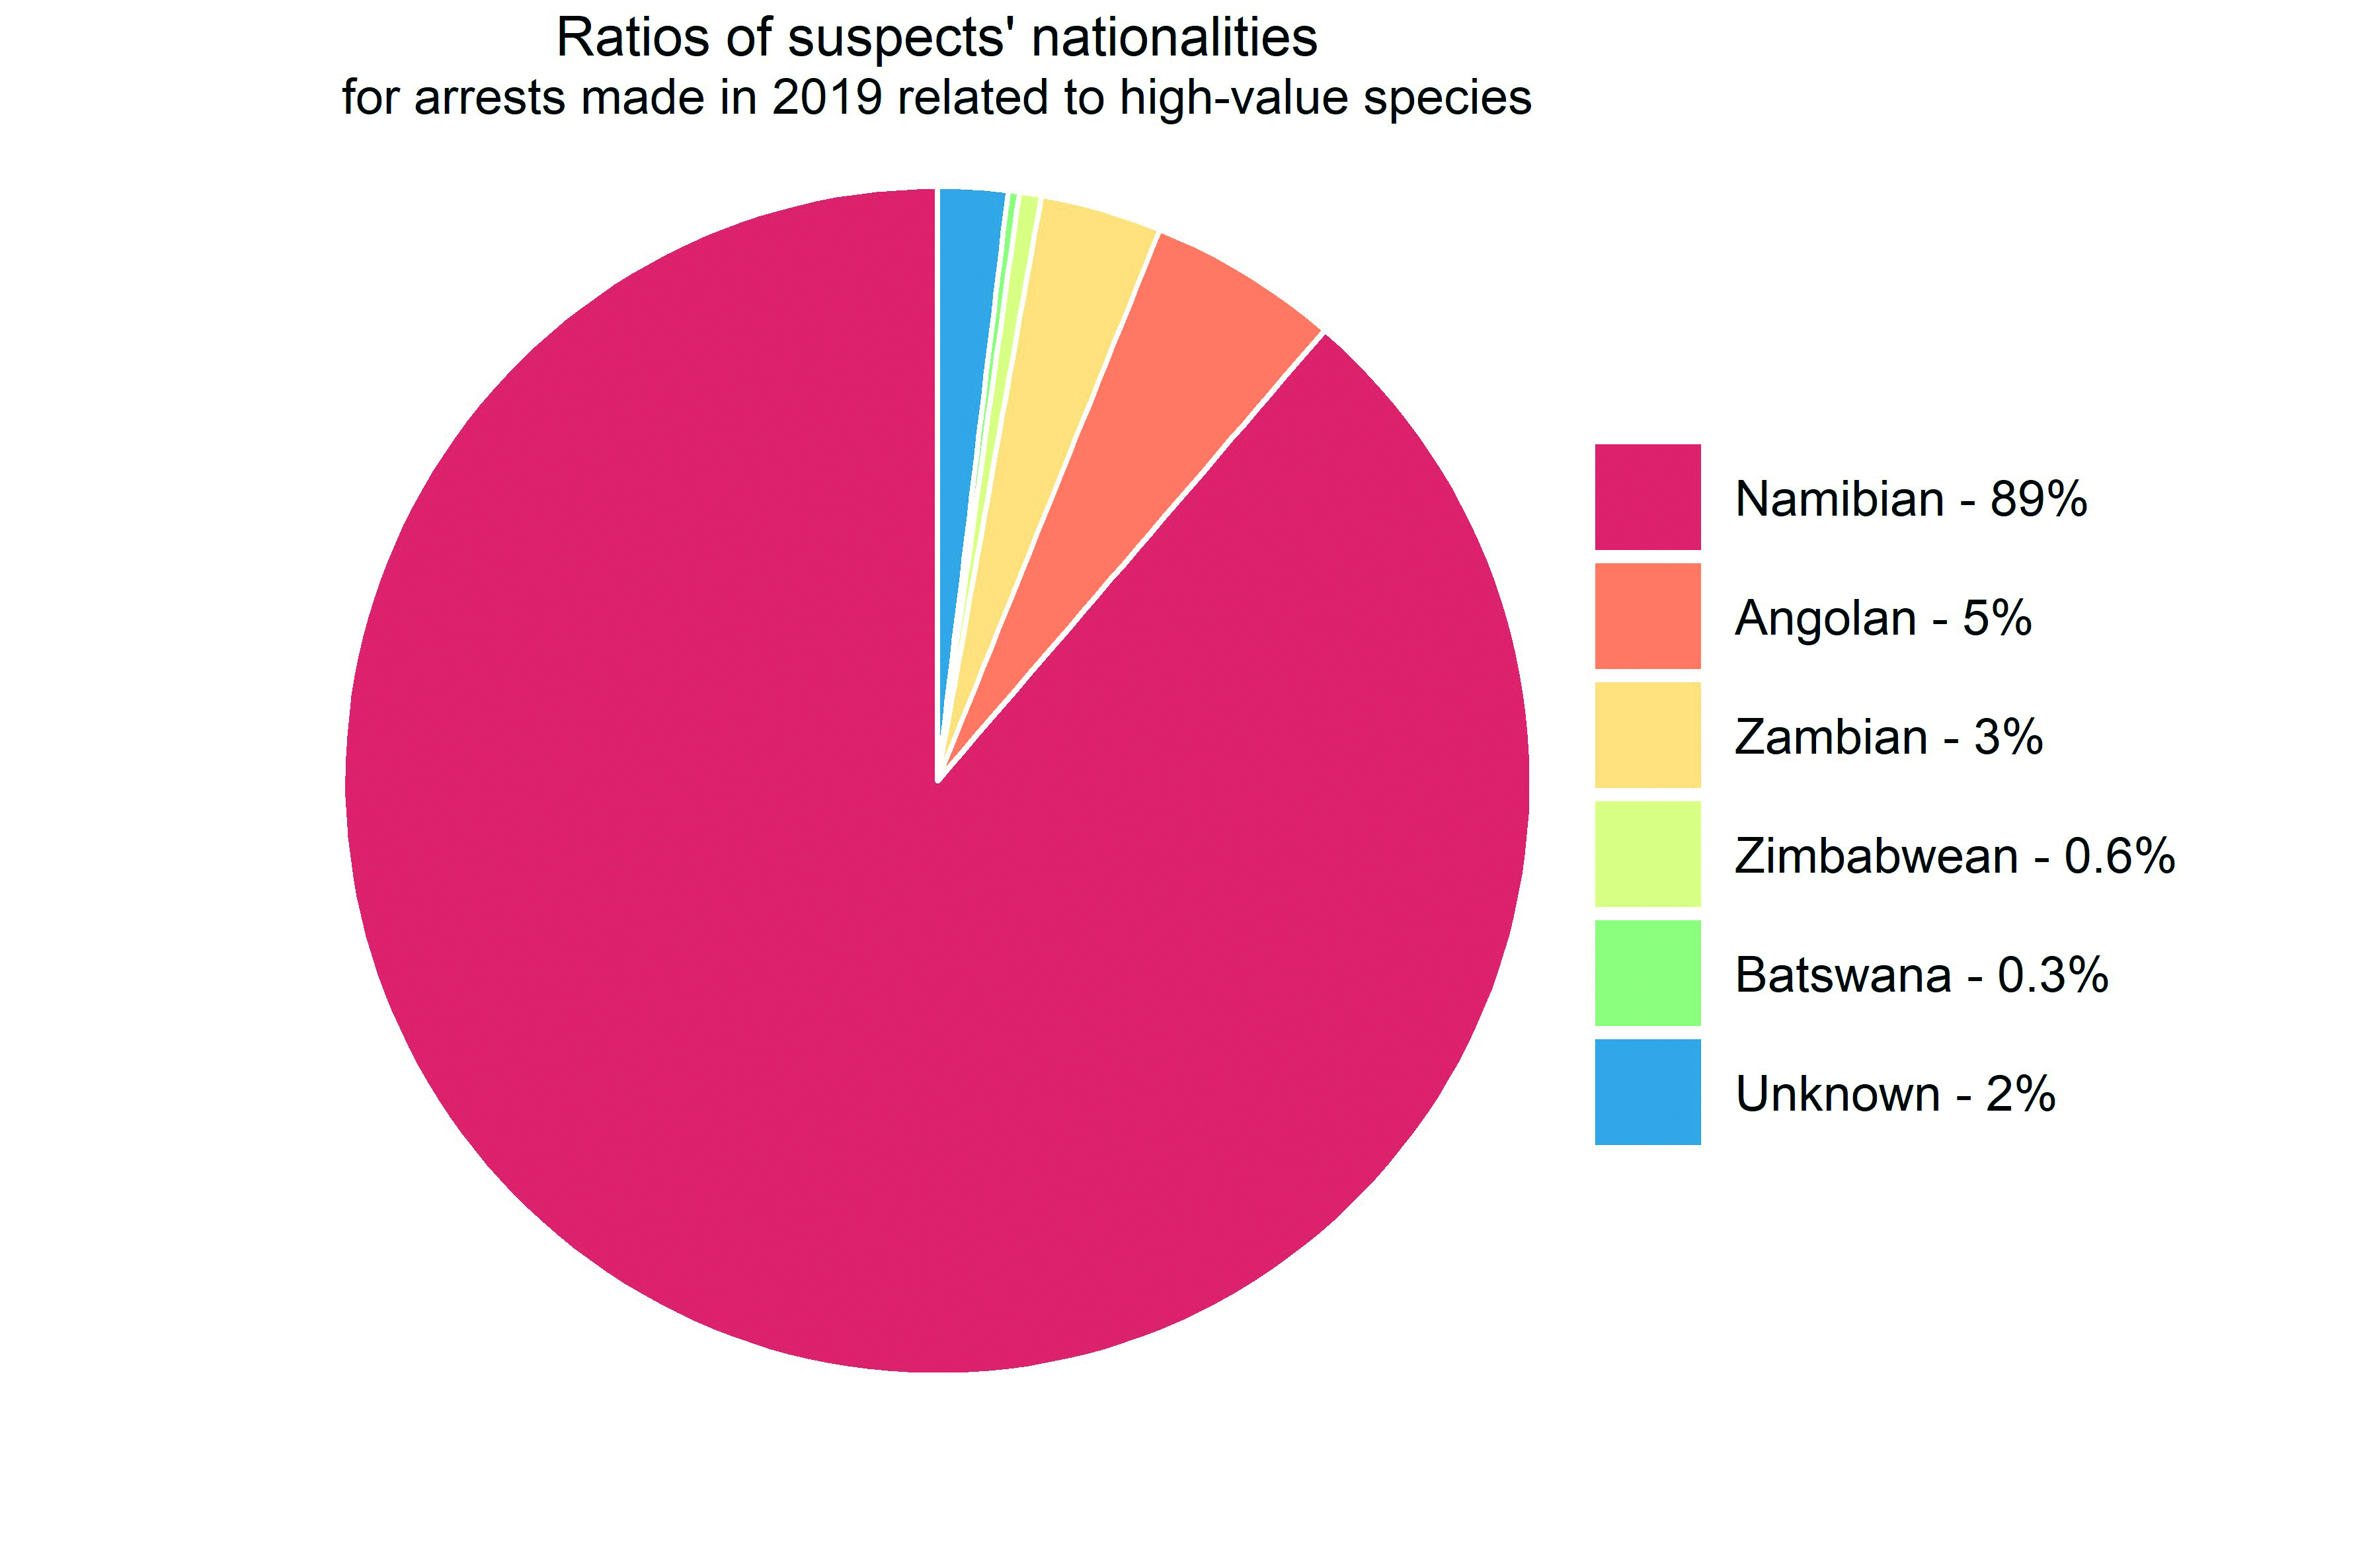 A pie chart showing wildlife crime suspects nationalities. 89% are Namibian.